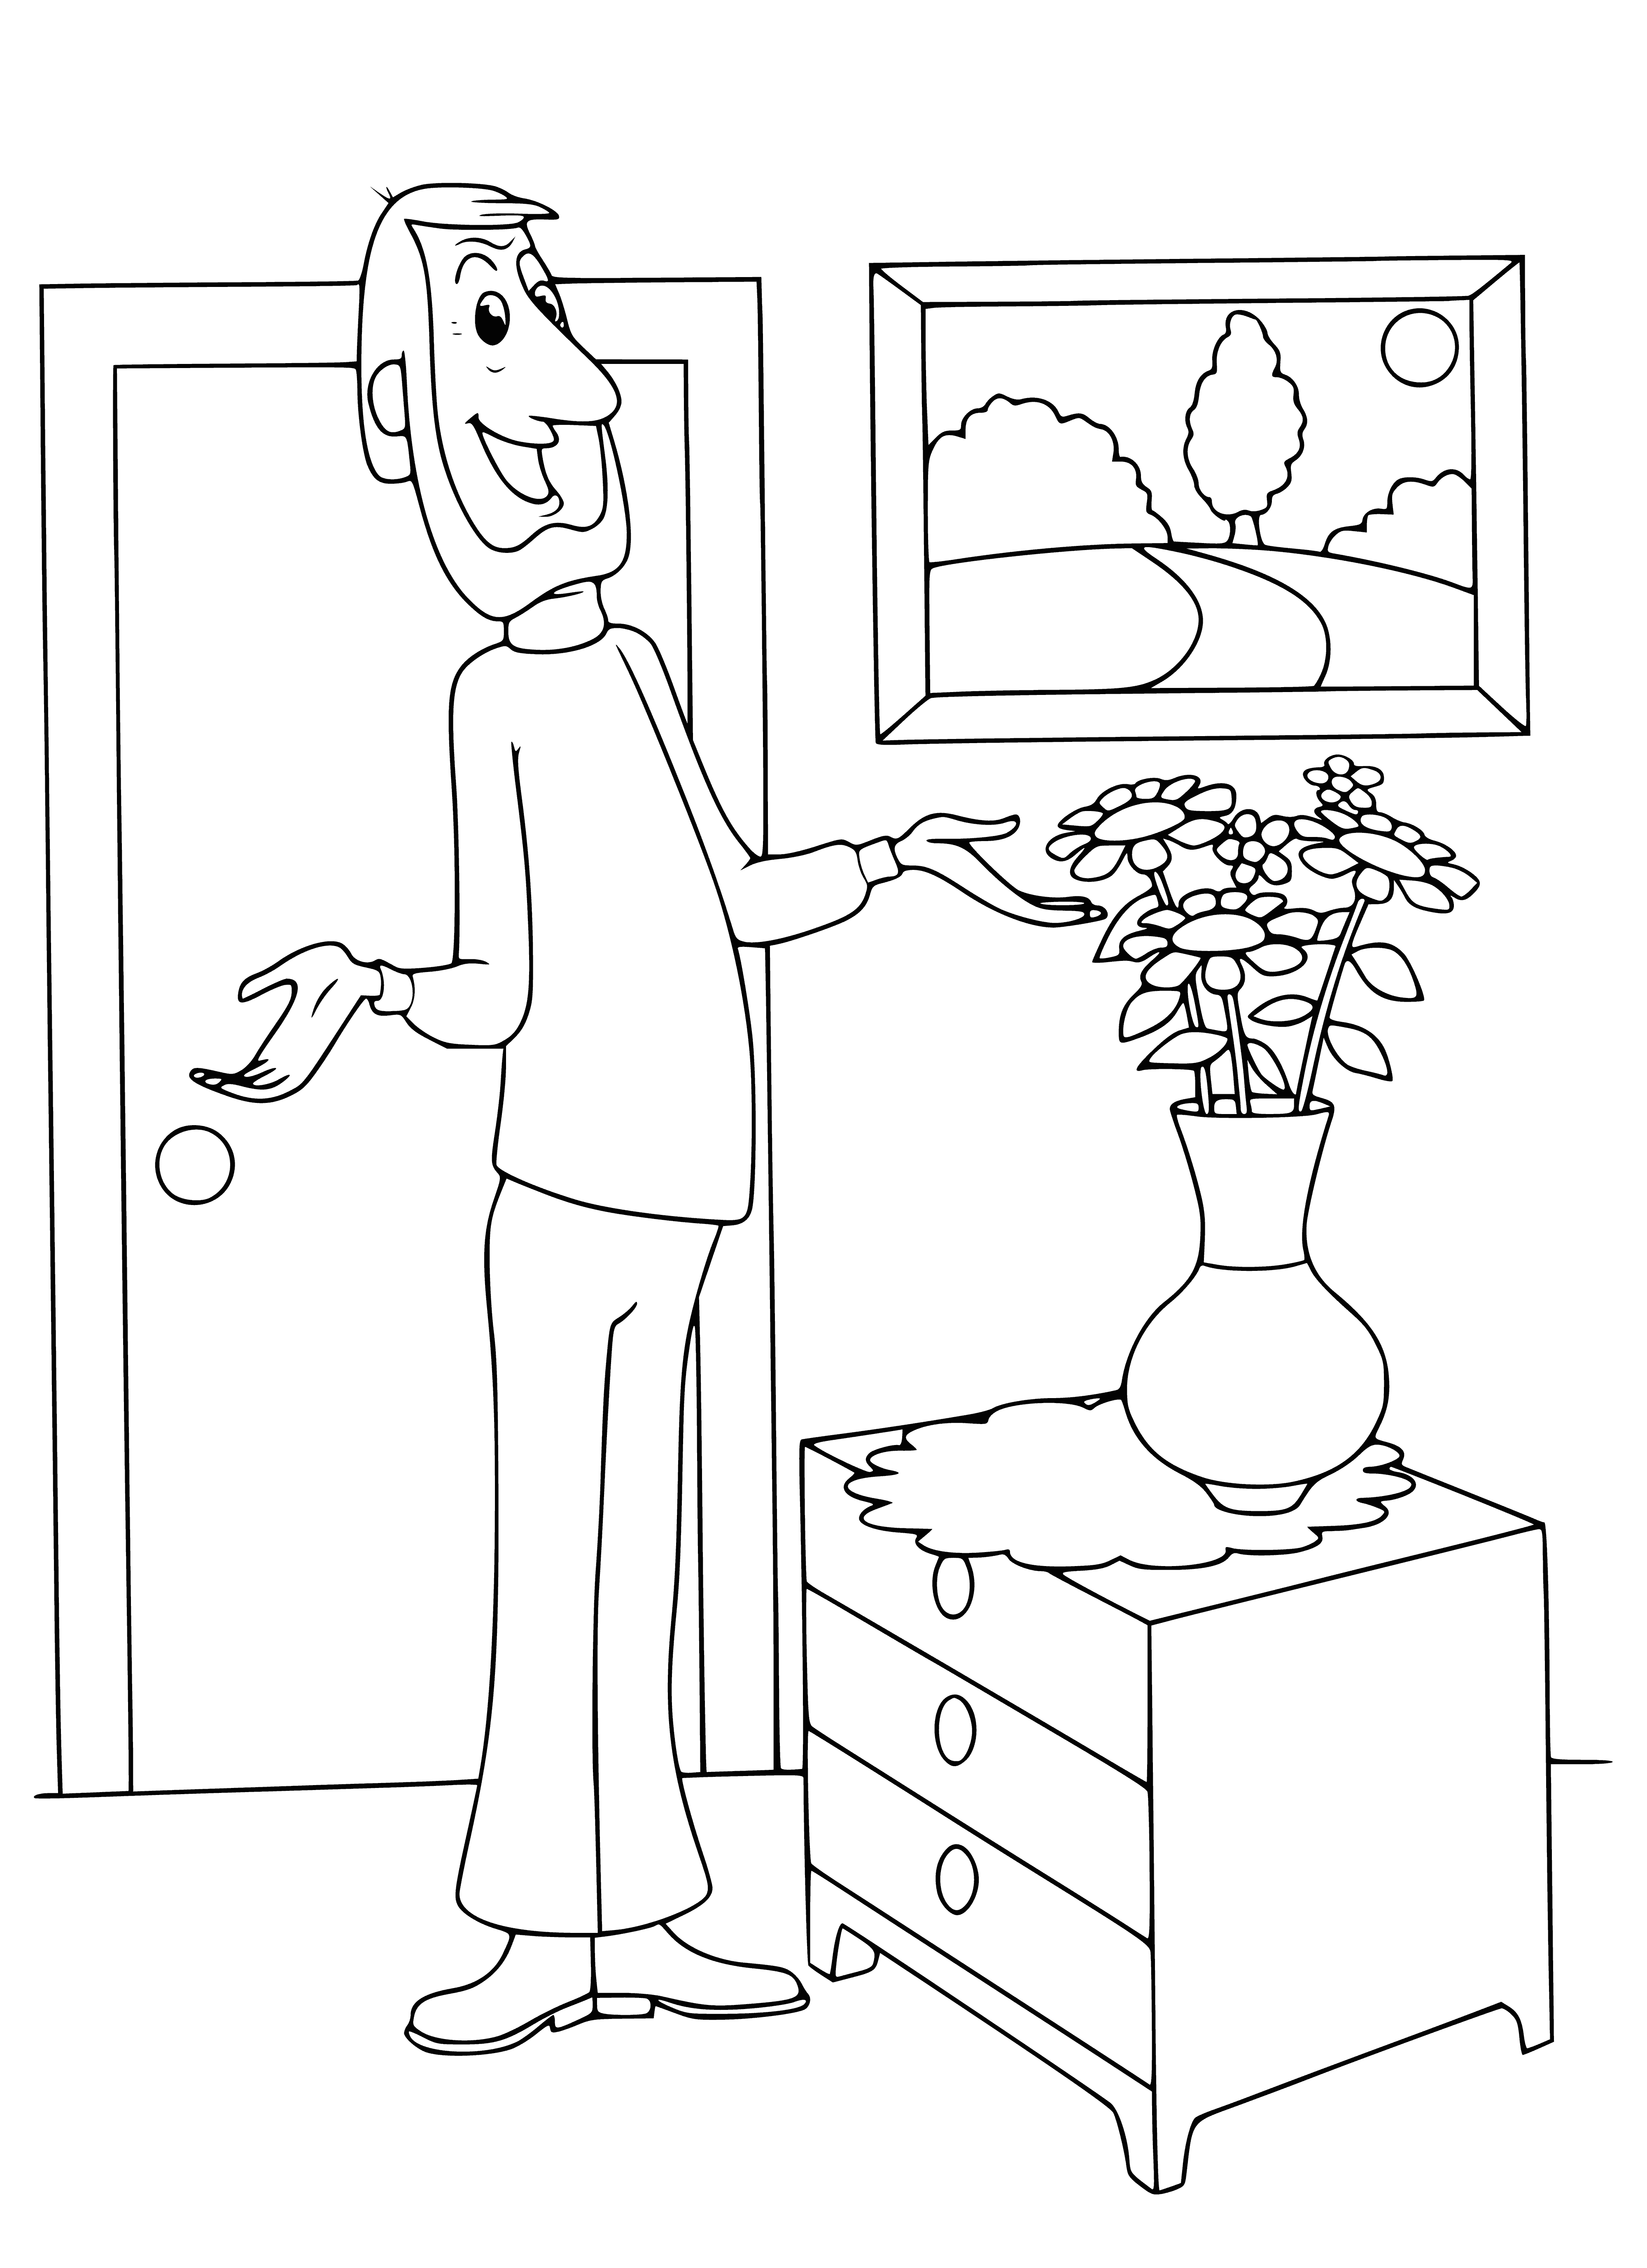 coloring page: Man in room, sitting in chair looking at book. Table in front of him, lamp on it.